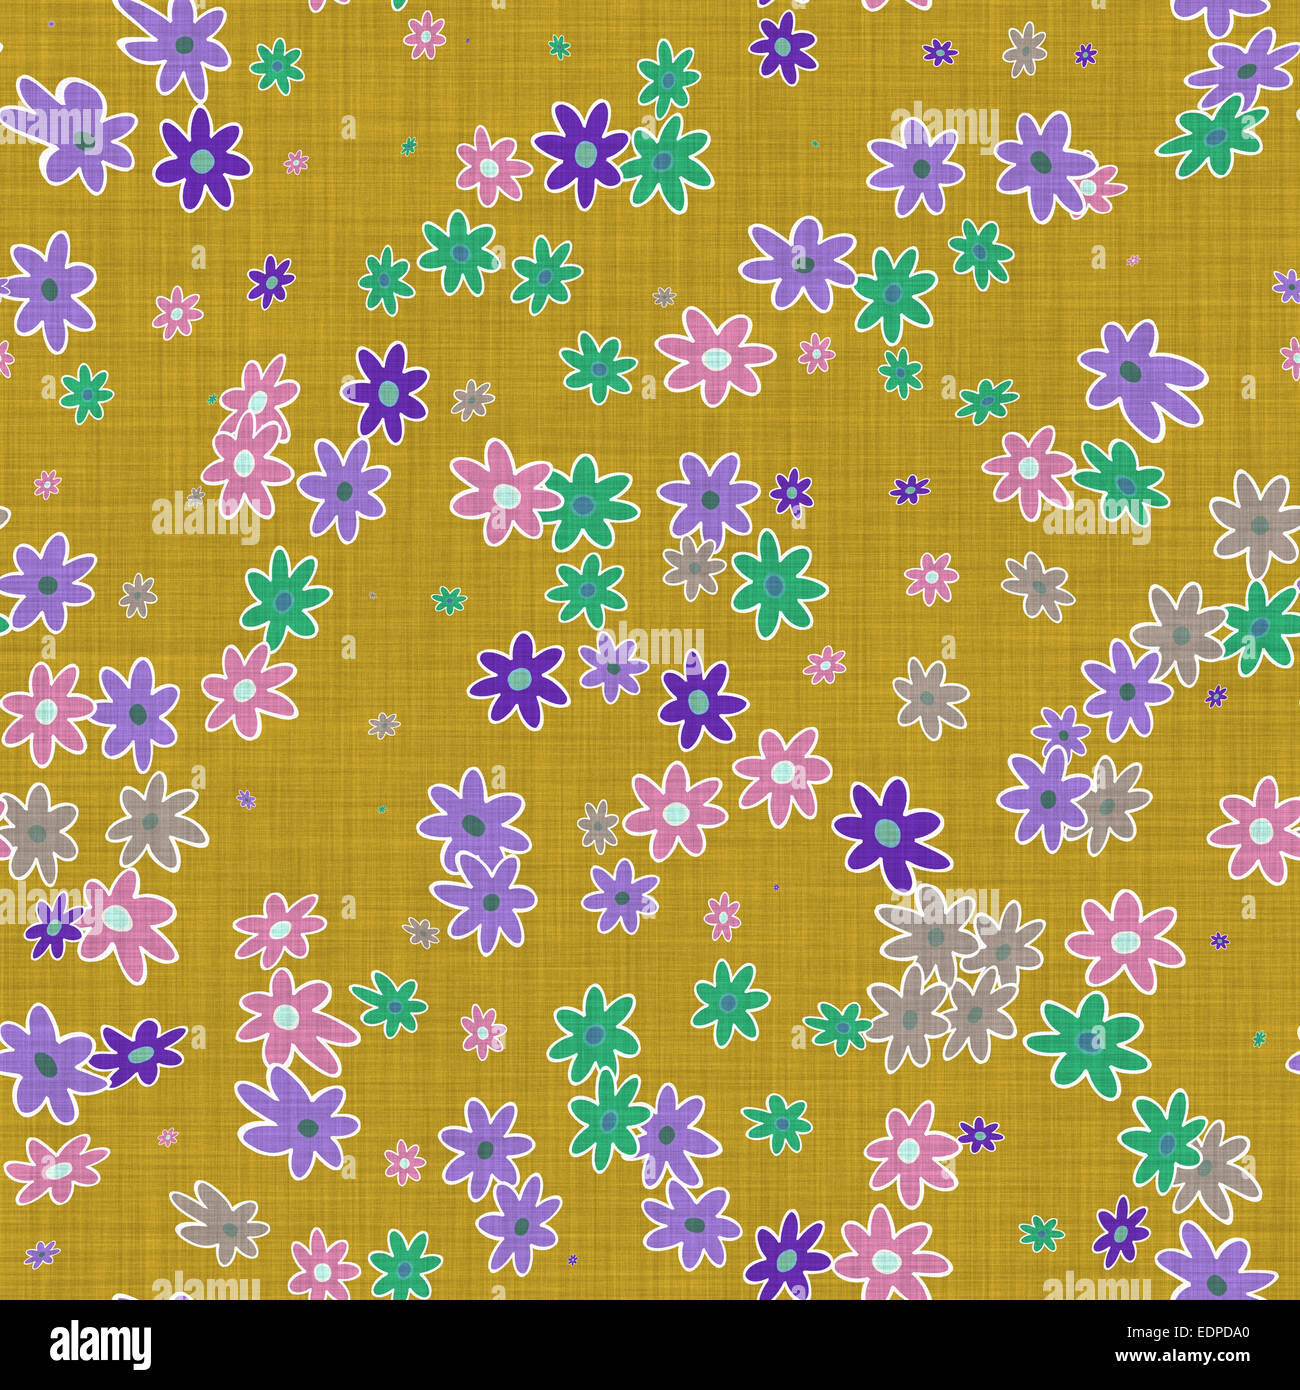 Canvas with floral pattern and seamless tiling for background Stock Photo